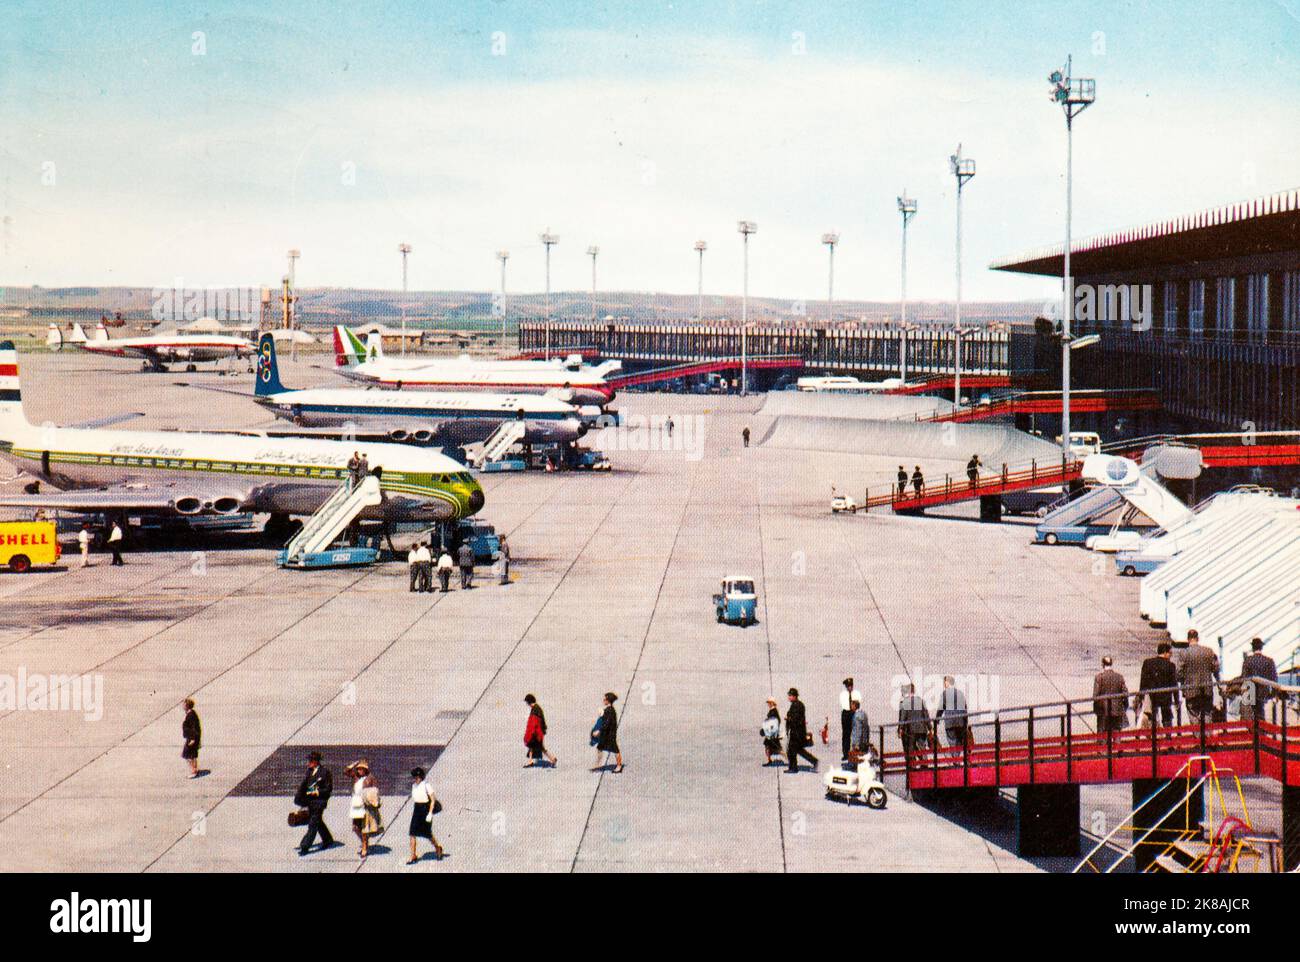 Airplanes at gate at Fiumicino airport in Rome. It is possible to see several Comets and a Constellation. The image dates back to the second half of the sixties Stock Photo